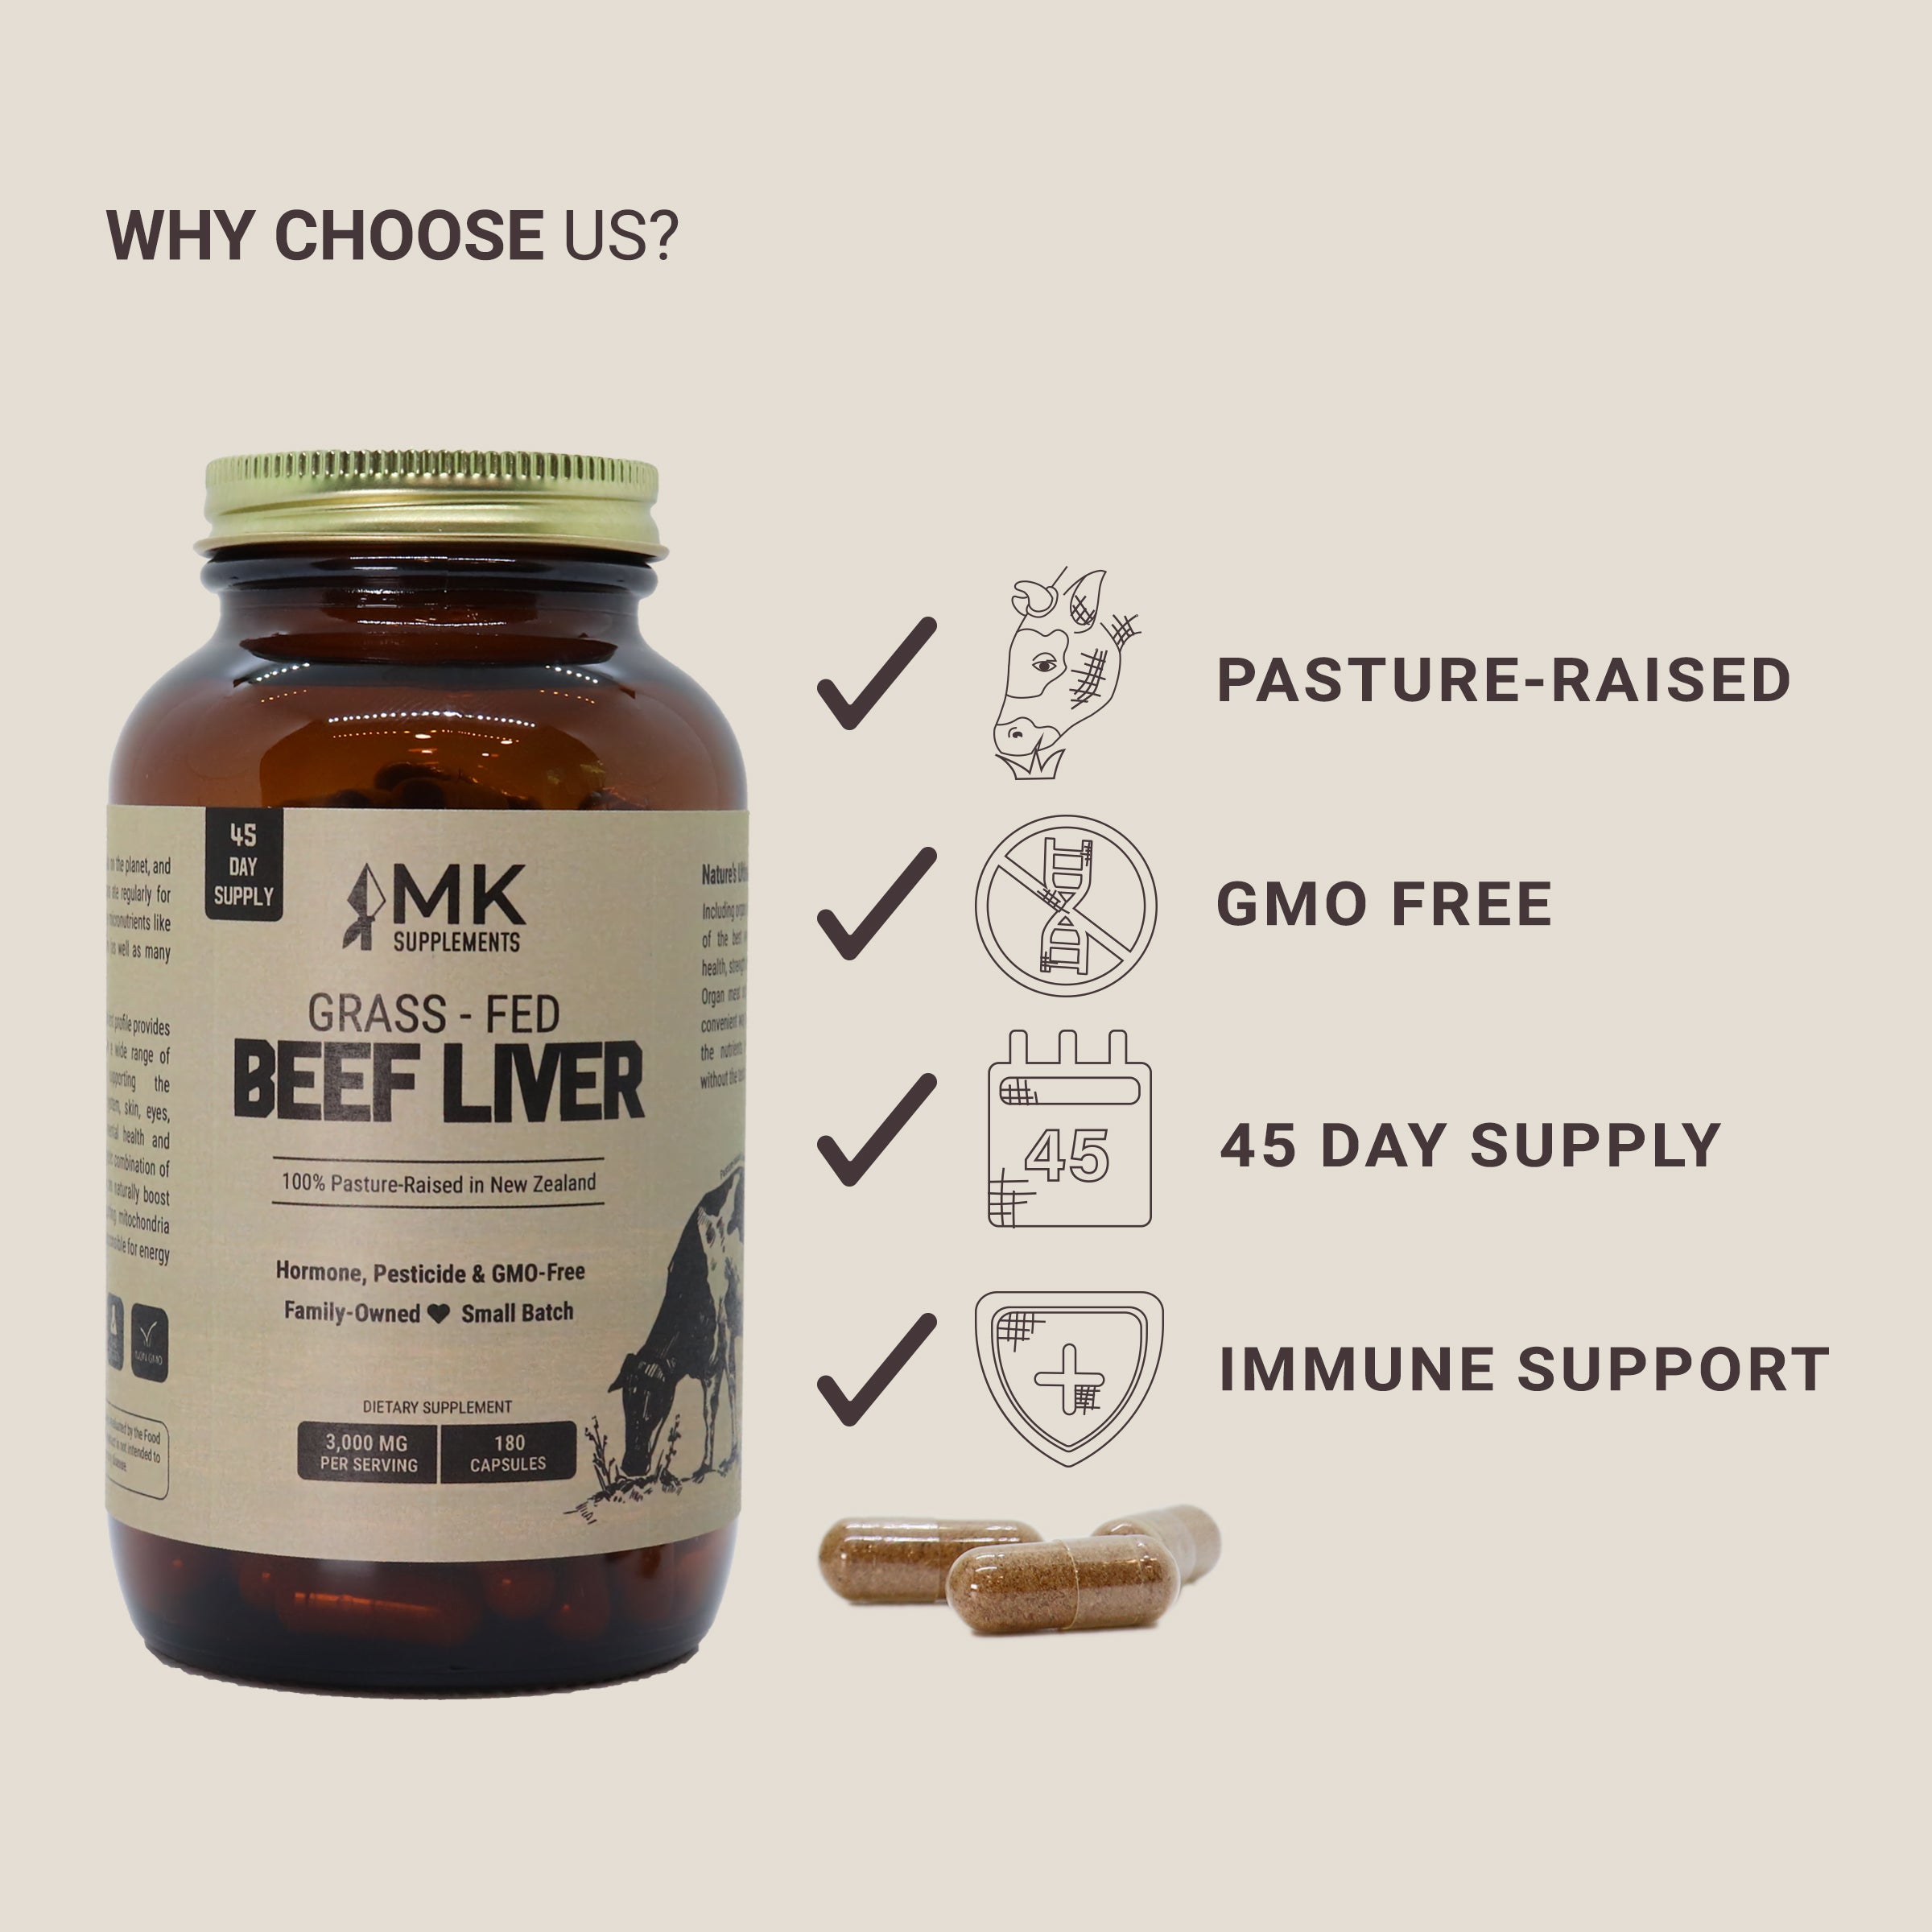 Grass-Fed Beef Liver Supplements: 100% Pasture-Raised & Non-GMO